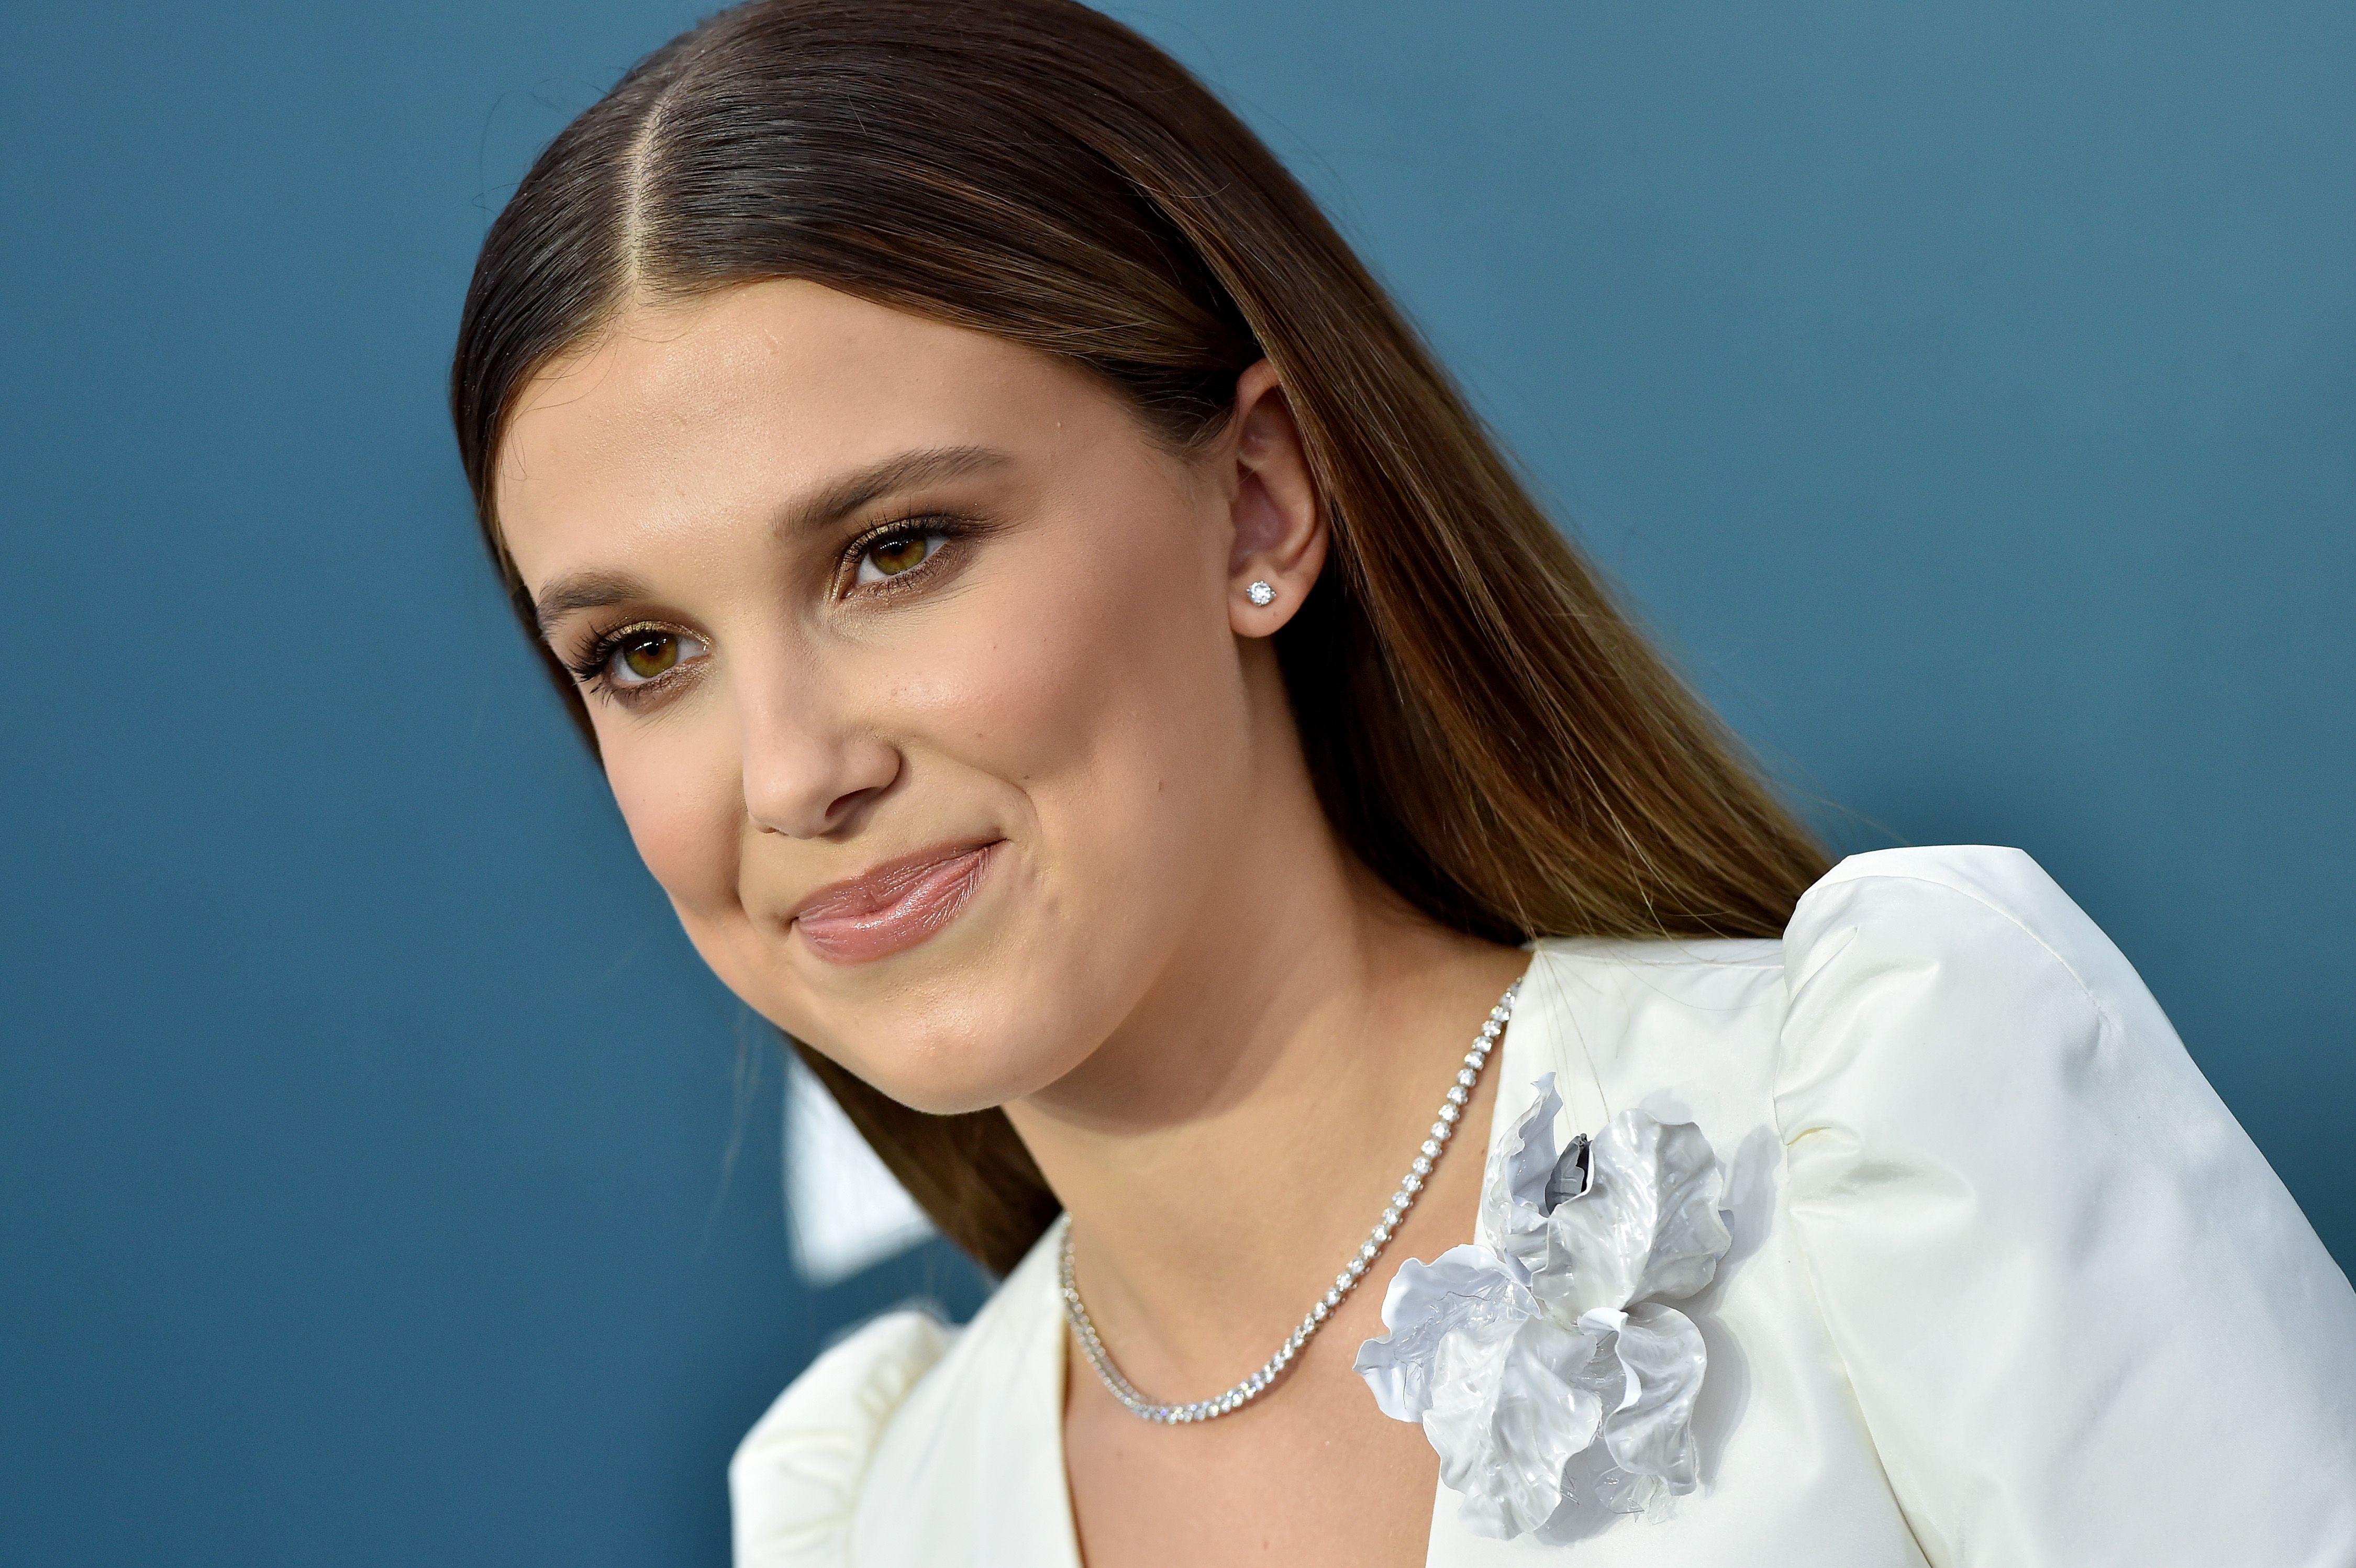 Millie Bobby Brown beauty interview